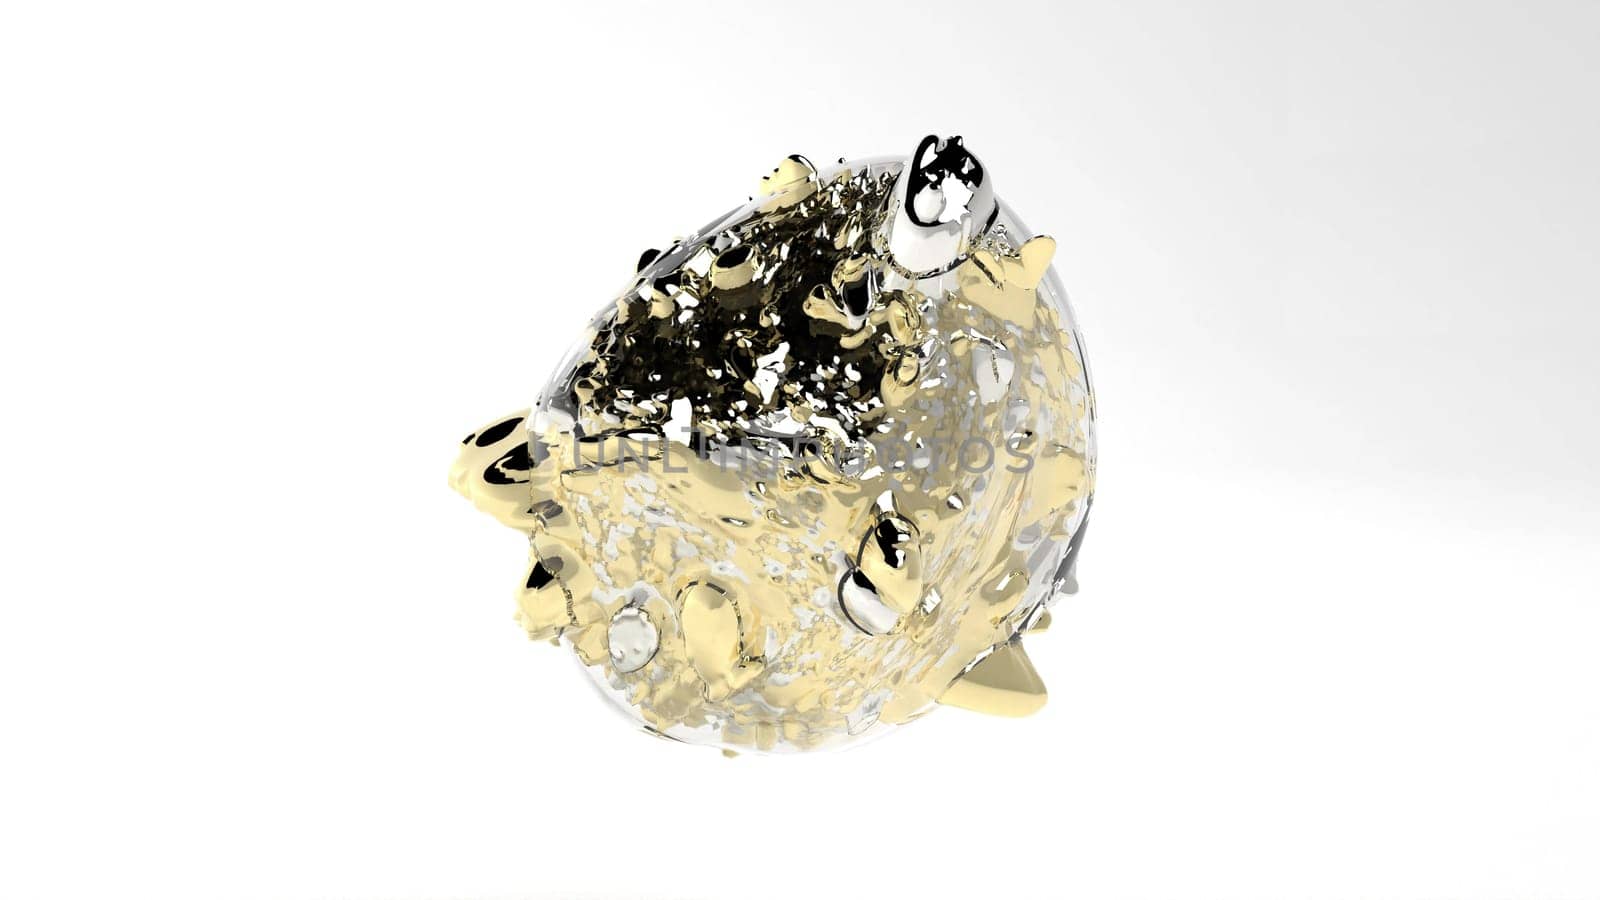 Golden silver Nugget with glass shell 3d render by Zozulinskyi